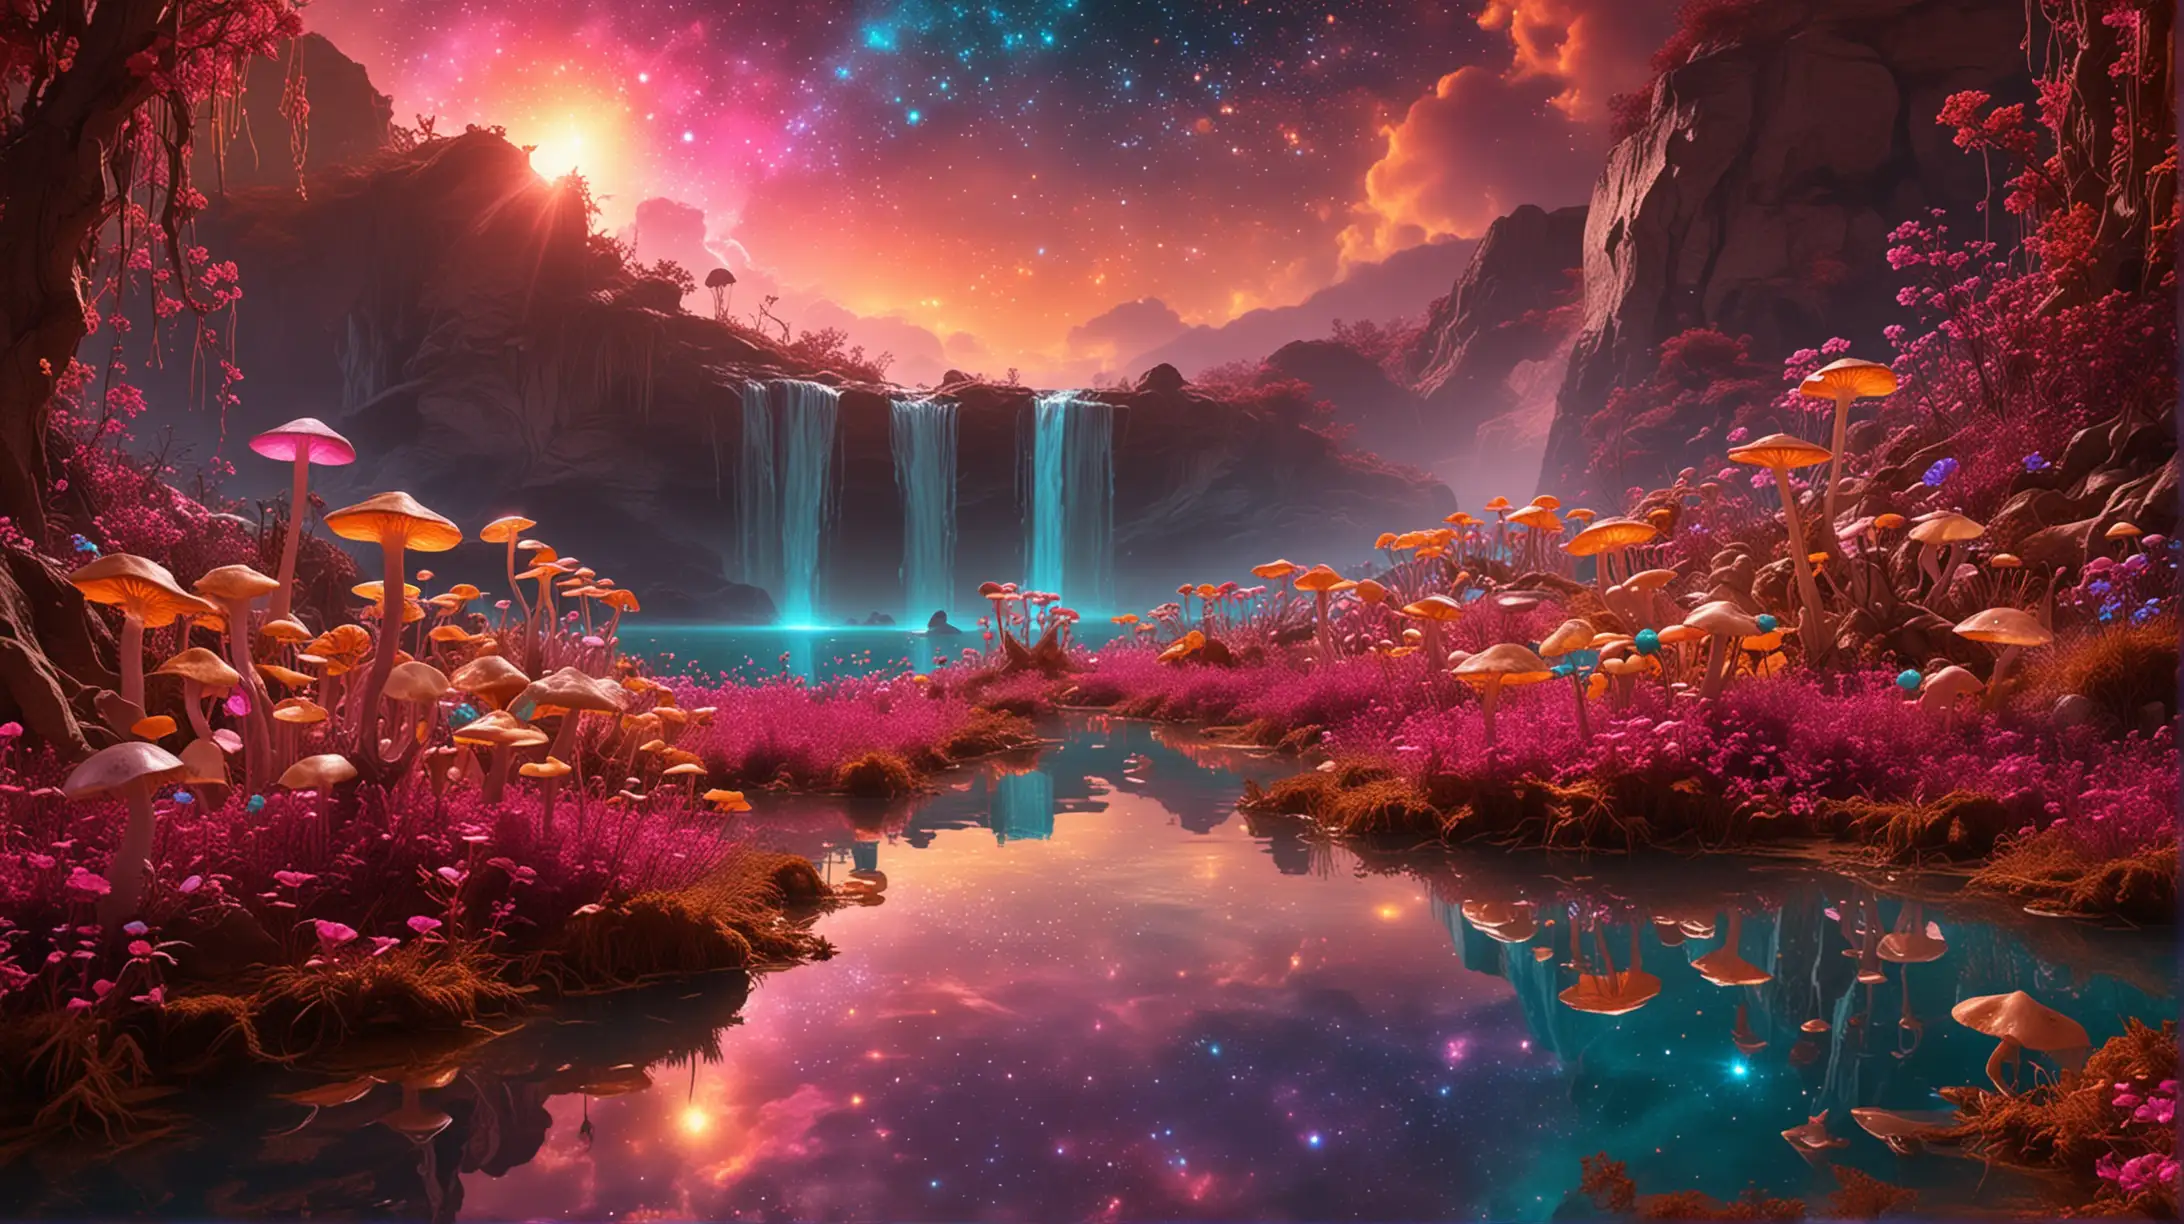 florescent fairytale mushrooms of Orange and Pink and golden-magenta in golden dust and a magical turquoise glowing lake and waterfall of luminescent magenta flowers, giant magenta-fire planet in the sky among galaxies